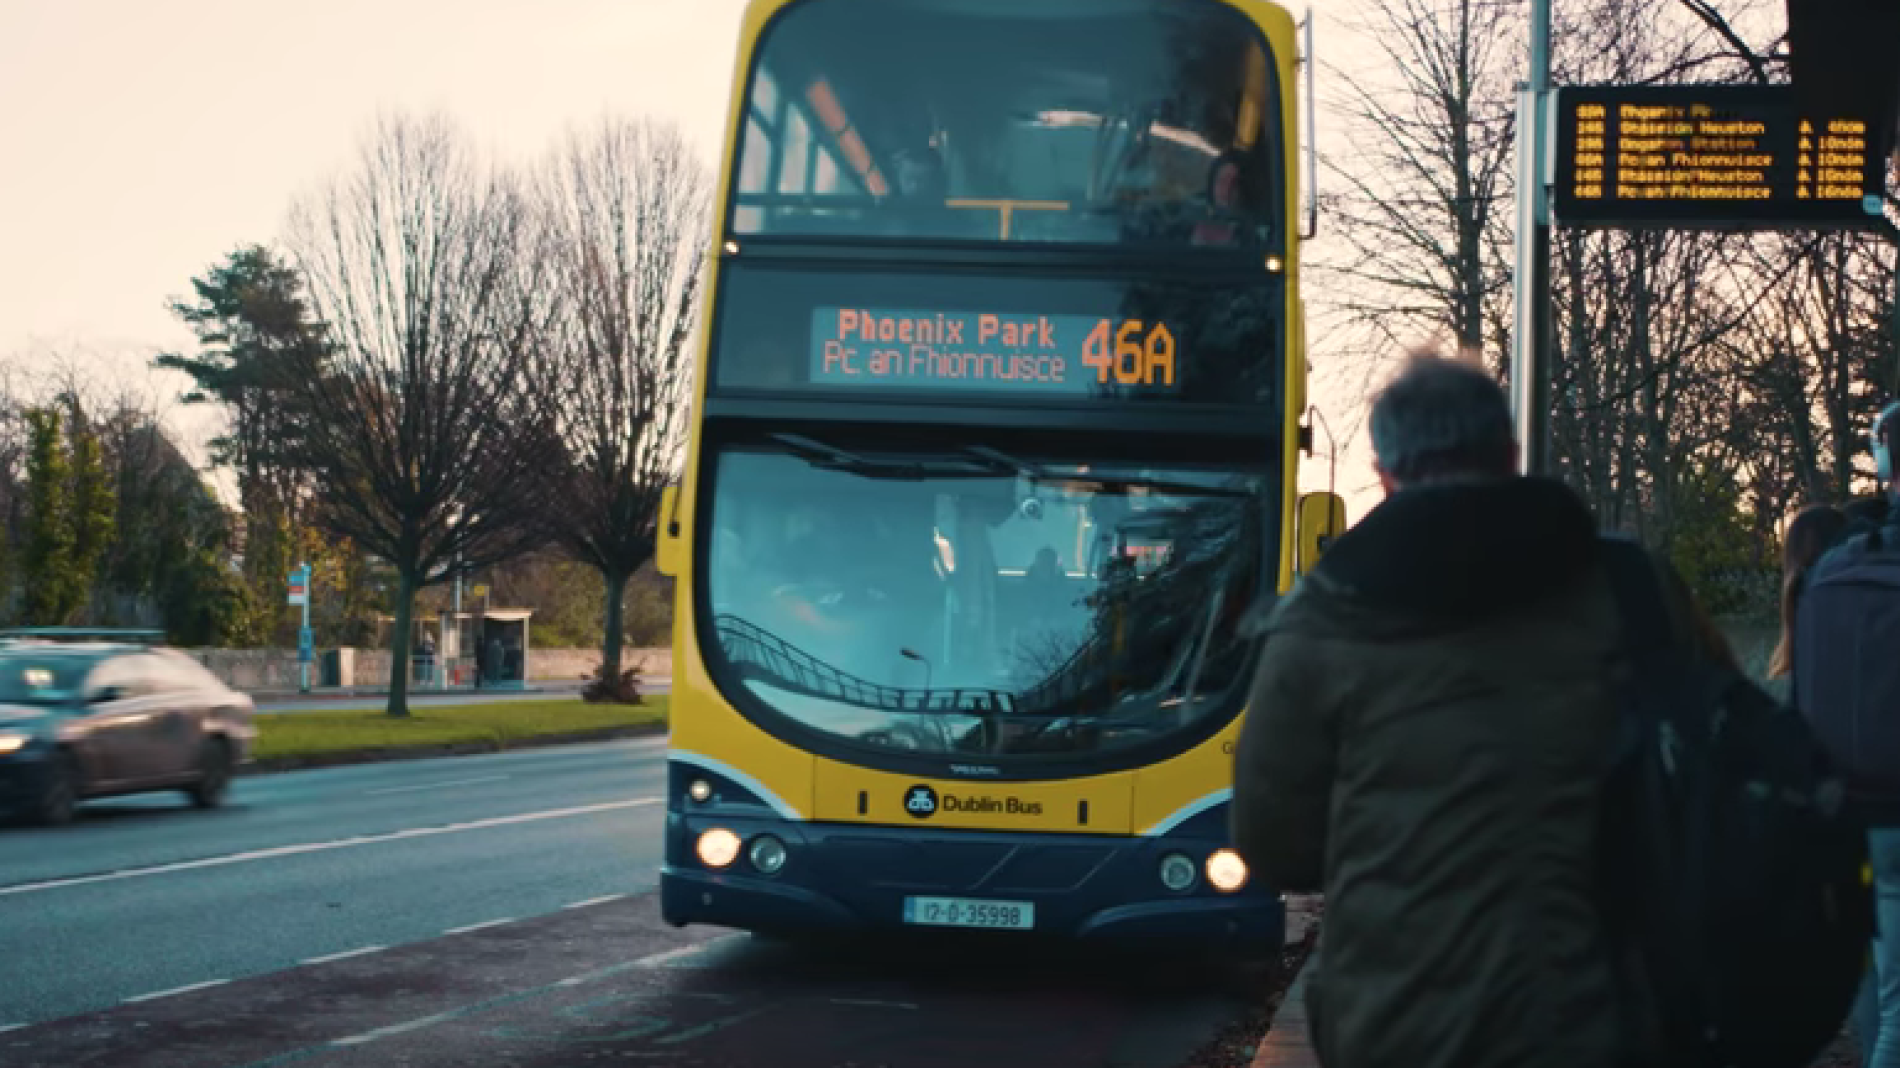 A Dublin Bus pulling in at a stop